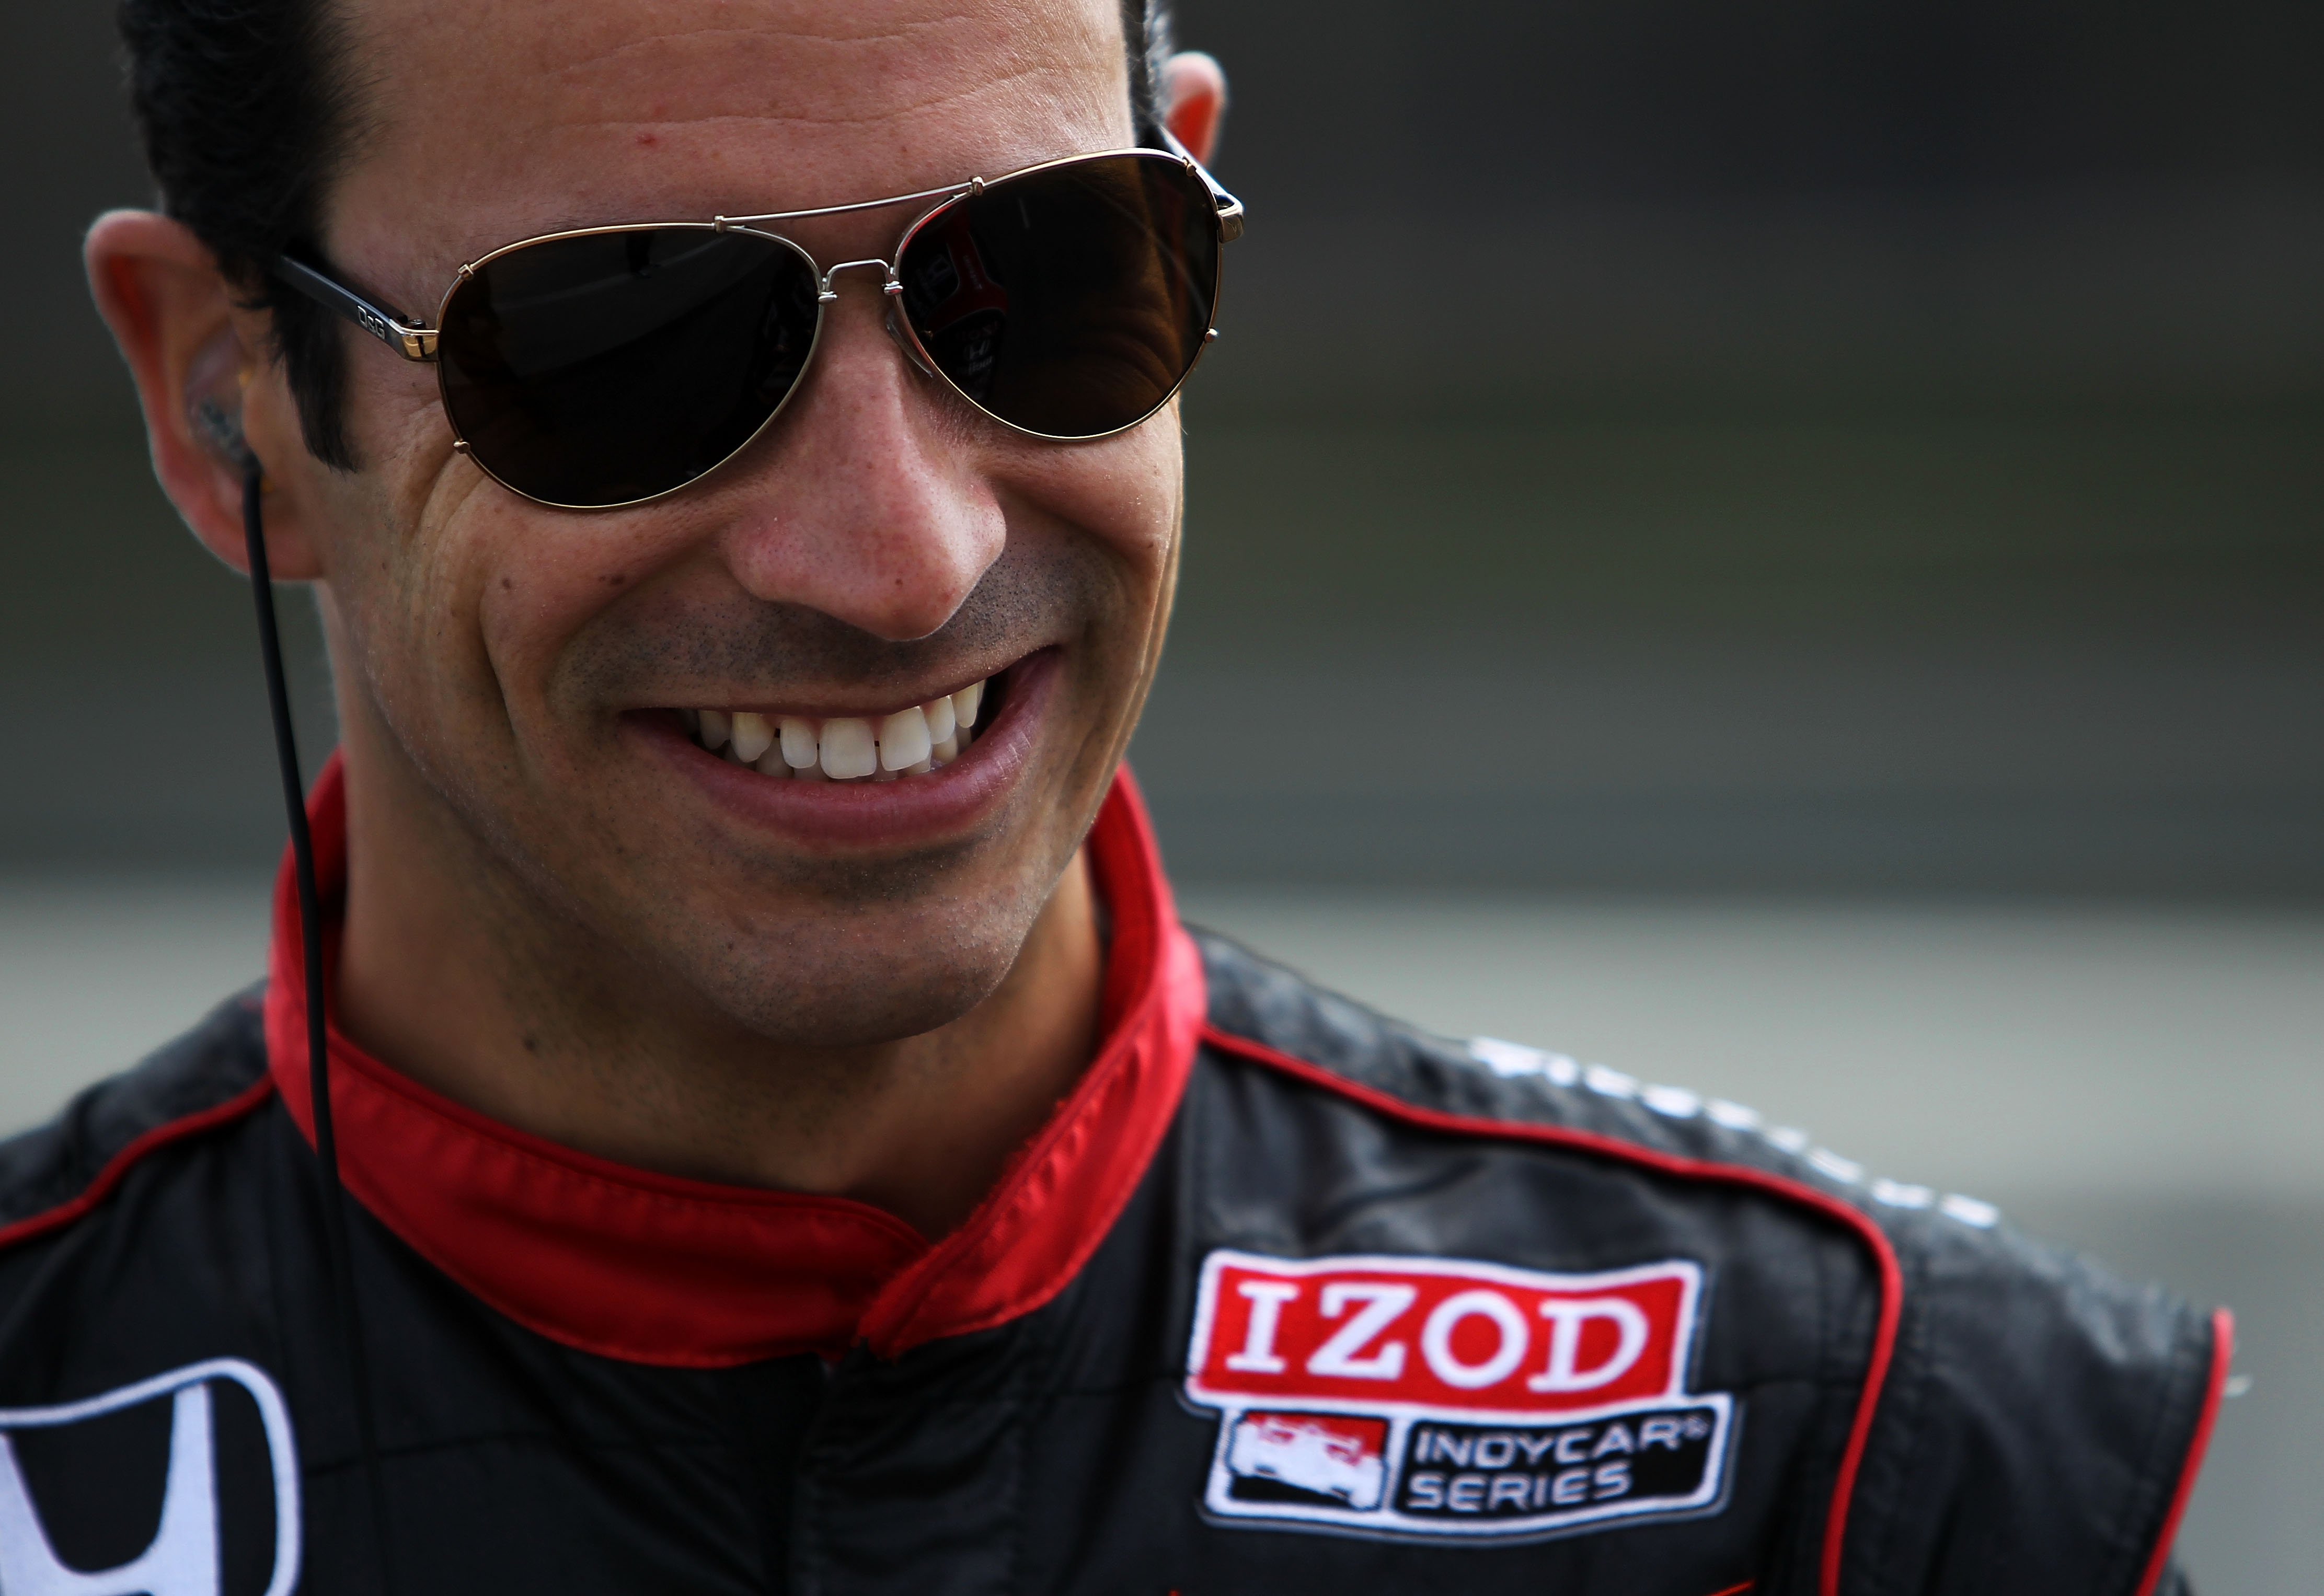 BIRMINGHAM, AL - MARCH 15:  Helio Castroneves of Brazil, driver of the #3 Team Penske Dallara Honda stands in pit lane during IZOD IndyCar Series Spring Training at Barber Motorsports Park on March 15, 2011 in Birmingham, Alabama.  (Photo by Nick Laham/Ge